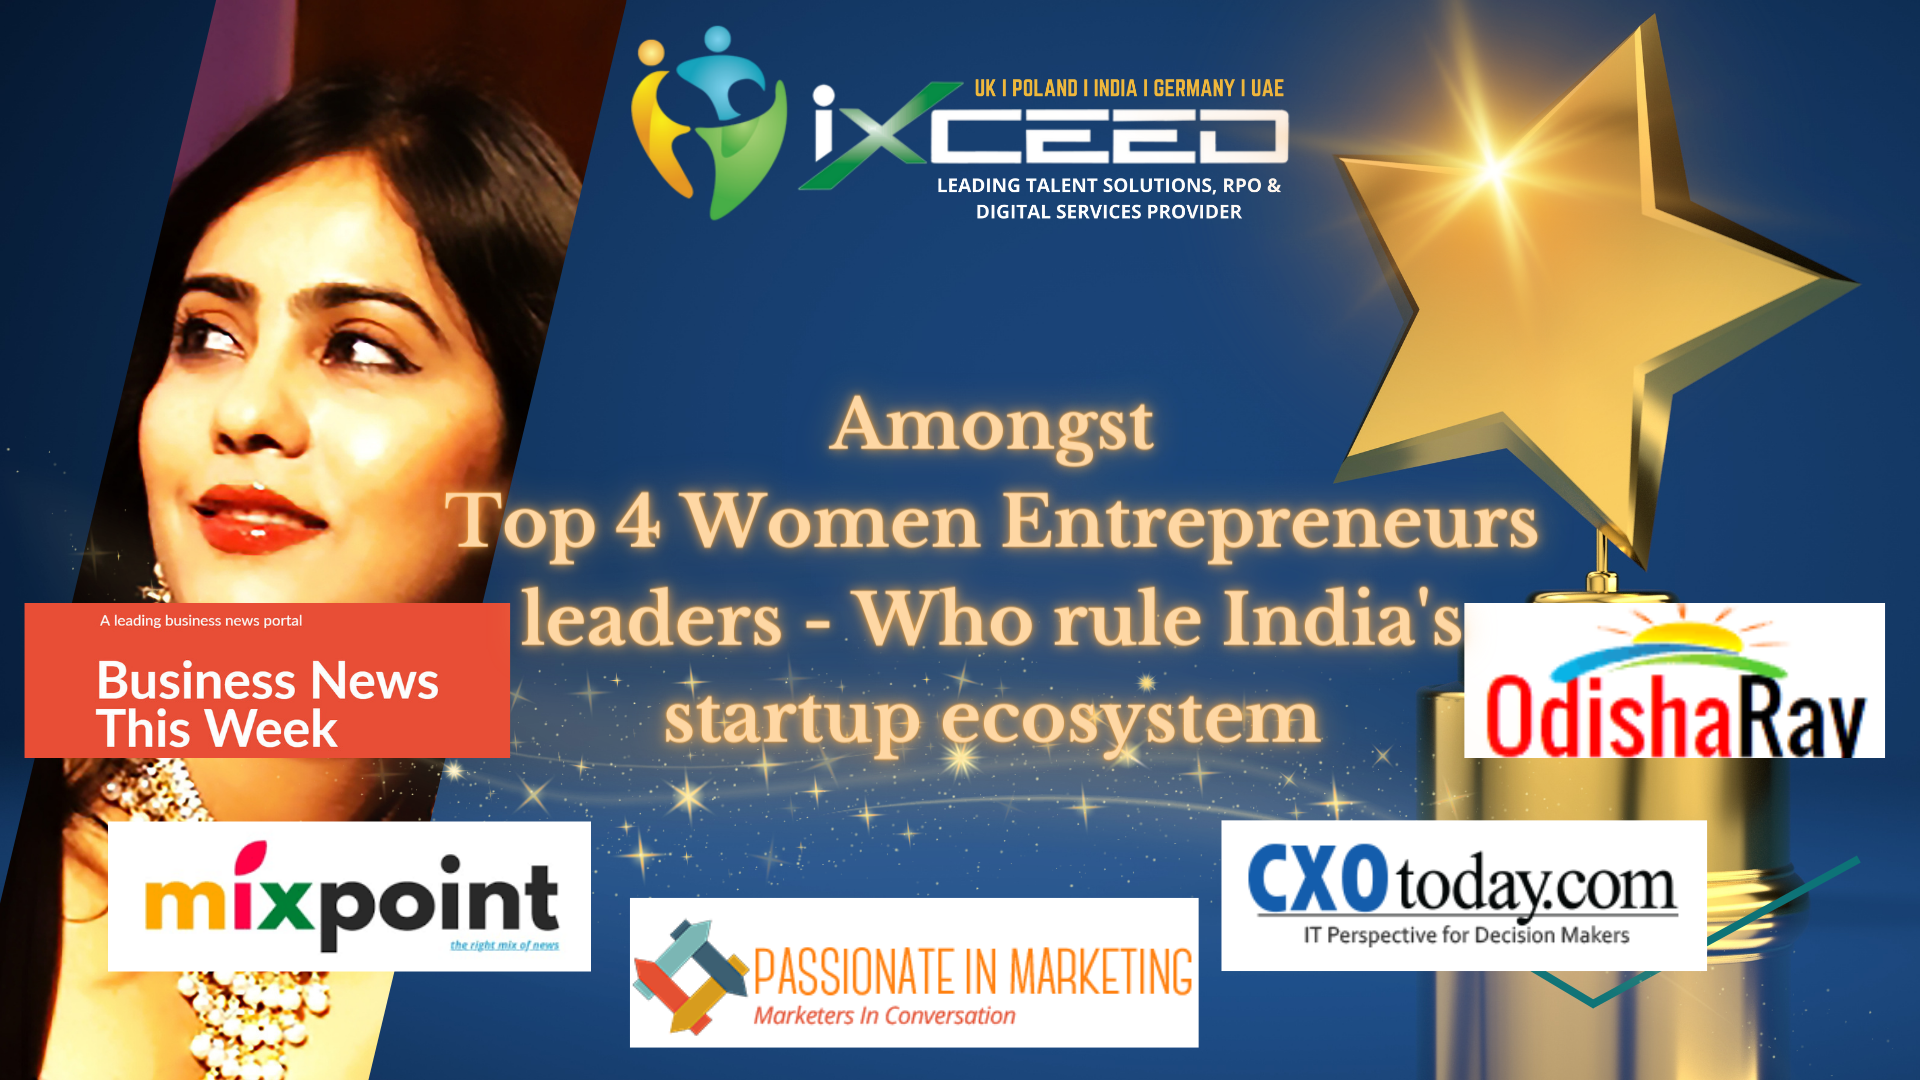 TITAN Women In Business Awards Winner - Yogita Tulsiani, Director and Co-Founder of iXceed Solutions